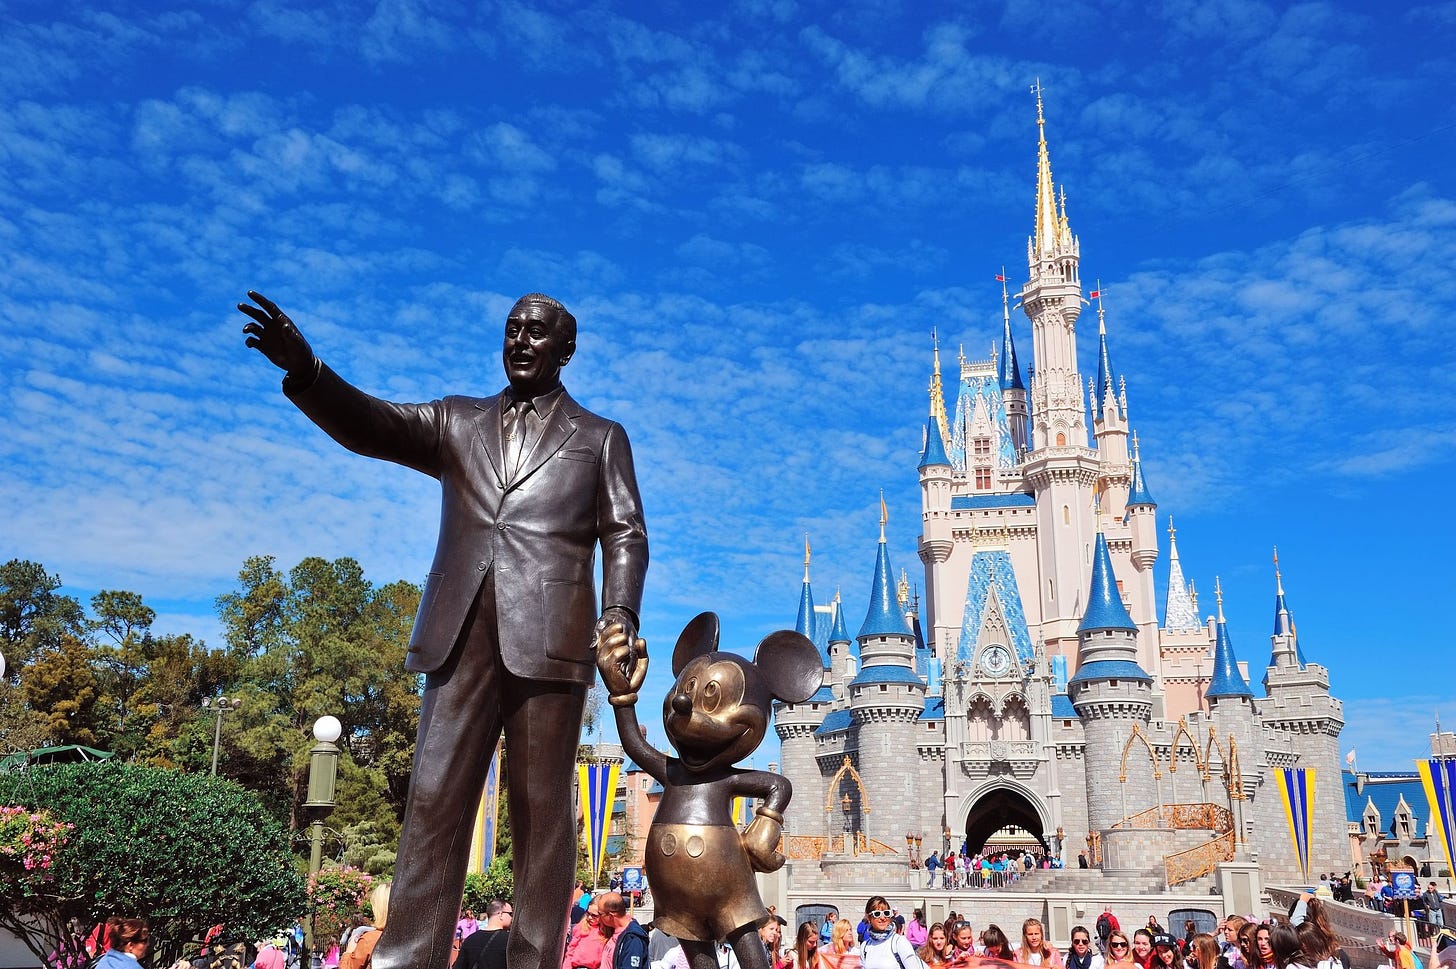 How to Plan a Disney Vacation: 14 Tips for Your Trip to Walt Disney World |  Condé Nast Traveler